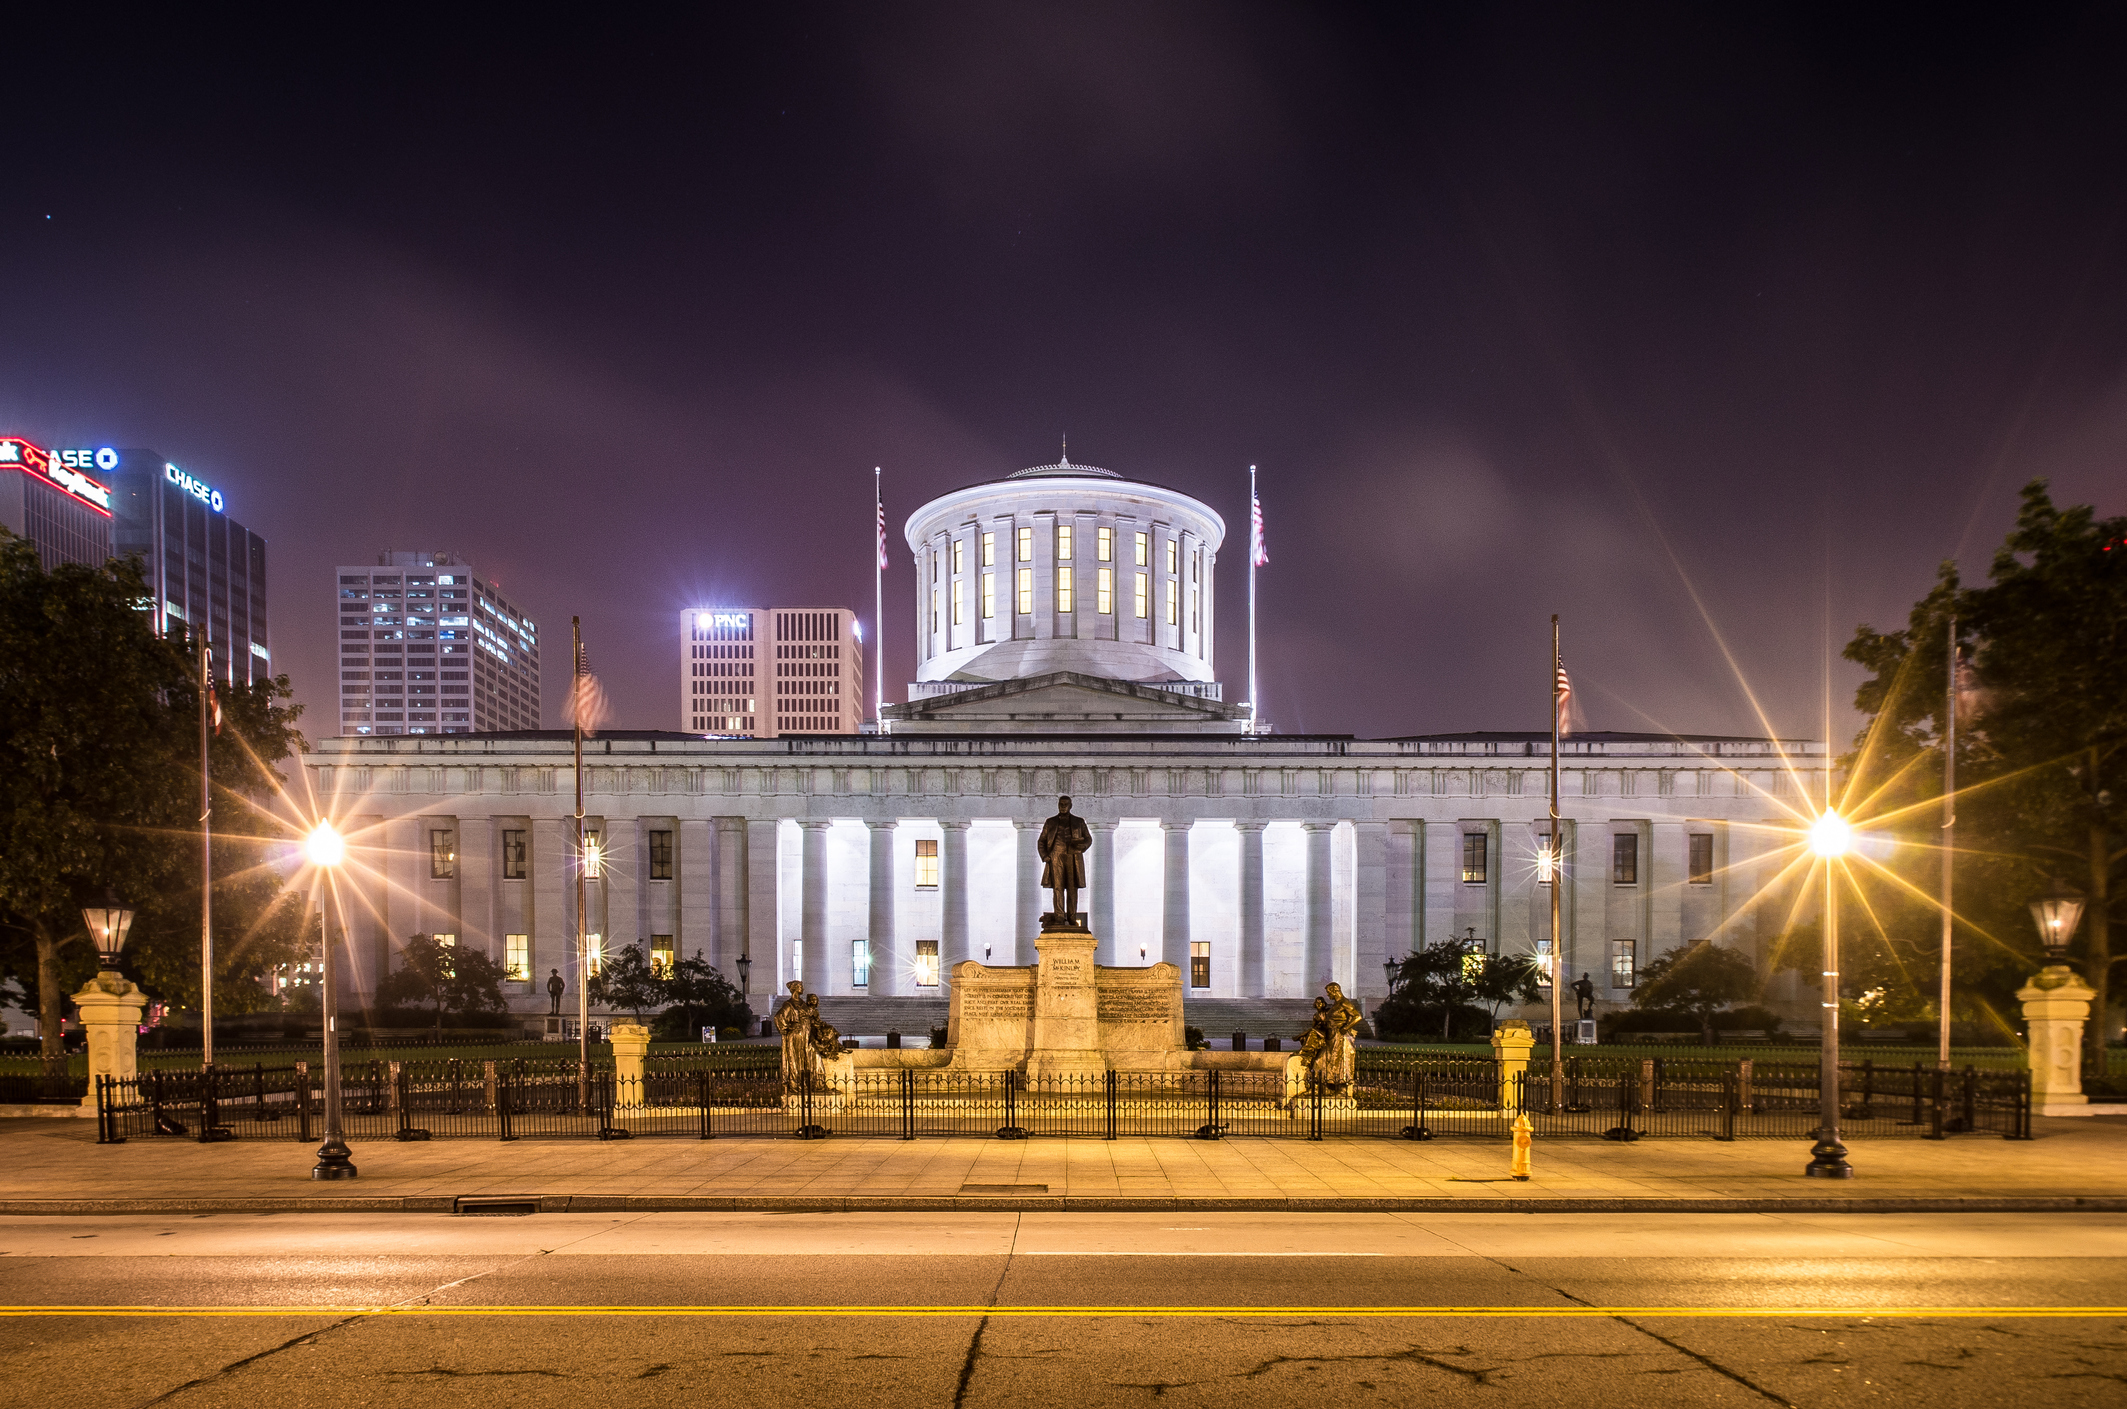 The Ohio State House at night. (Getty Images)